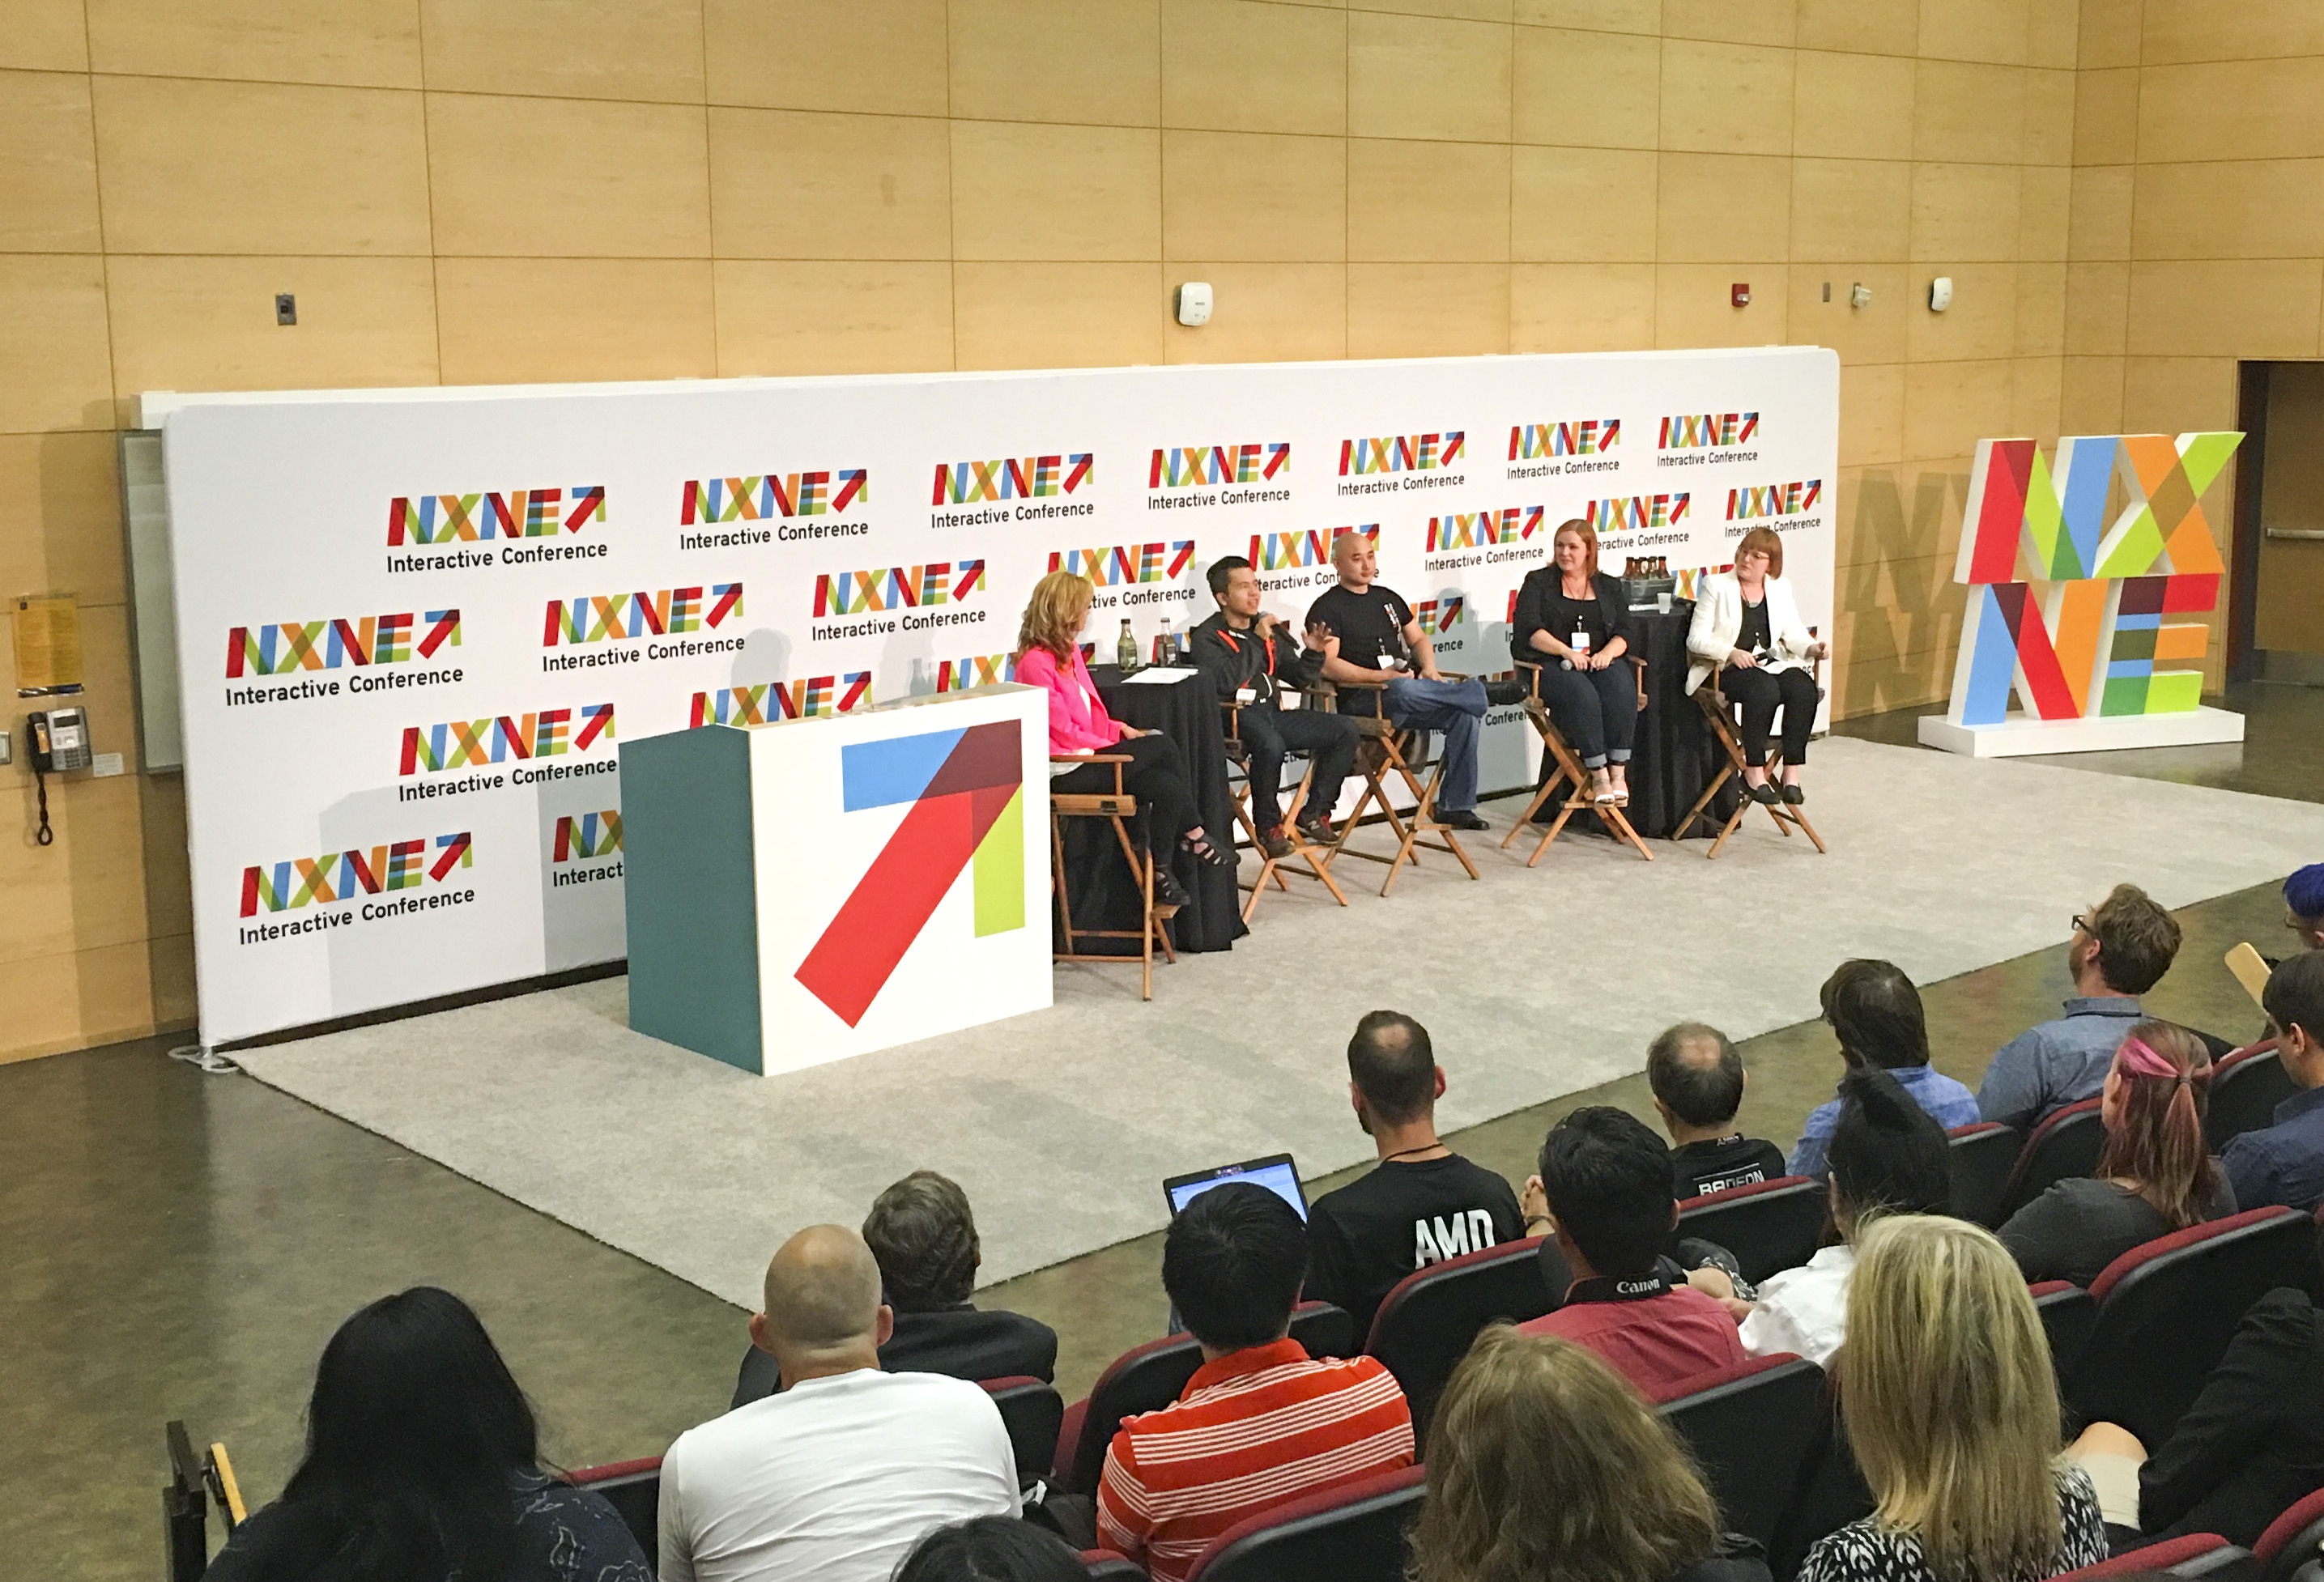 NXNE Future Land Conference